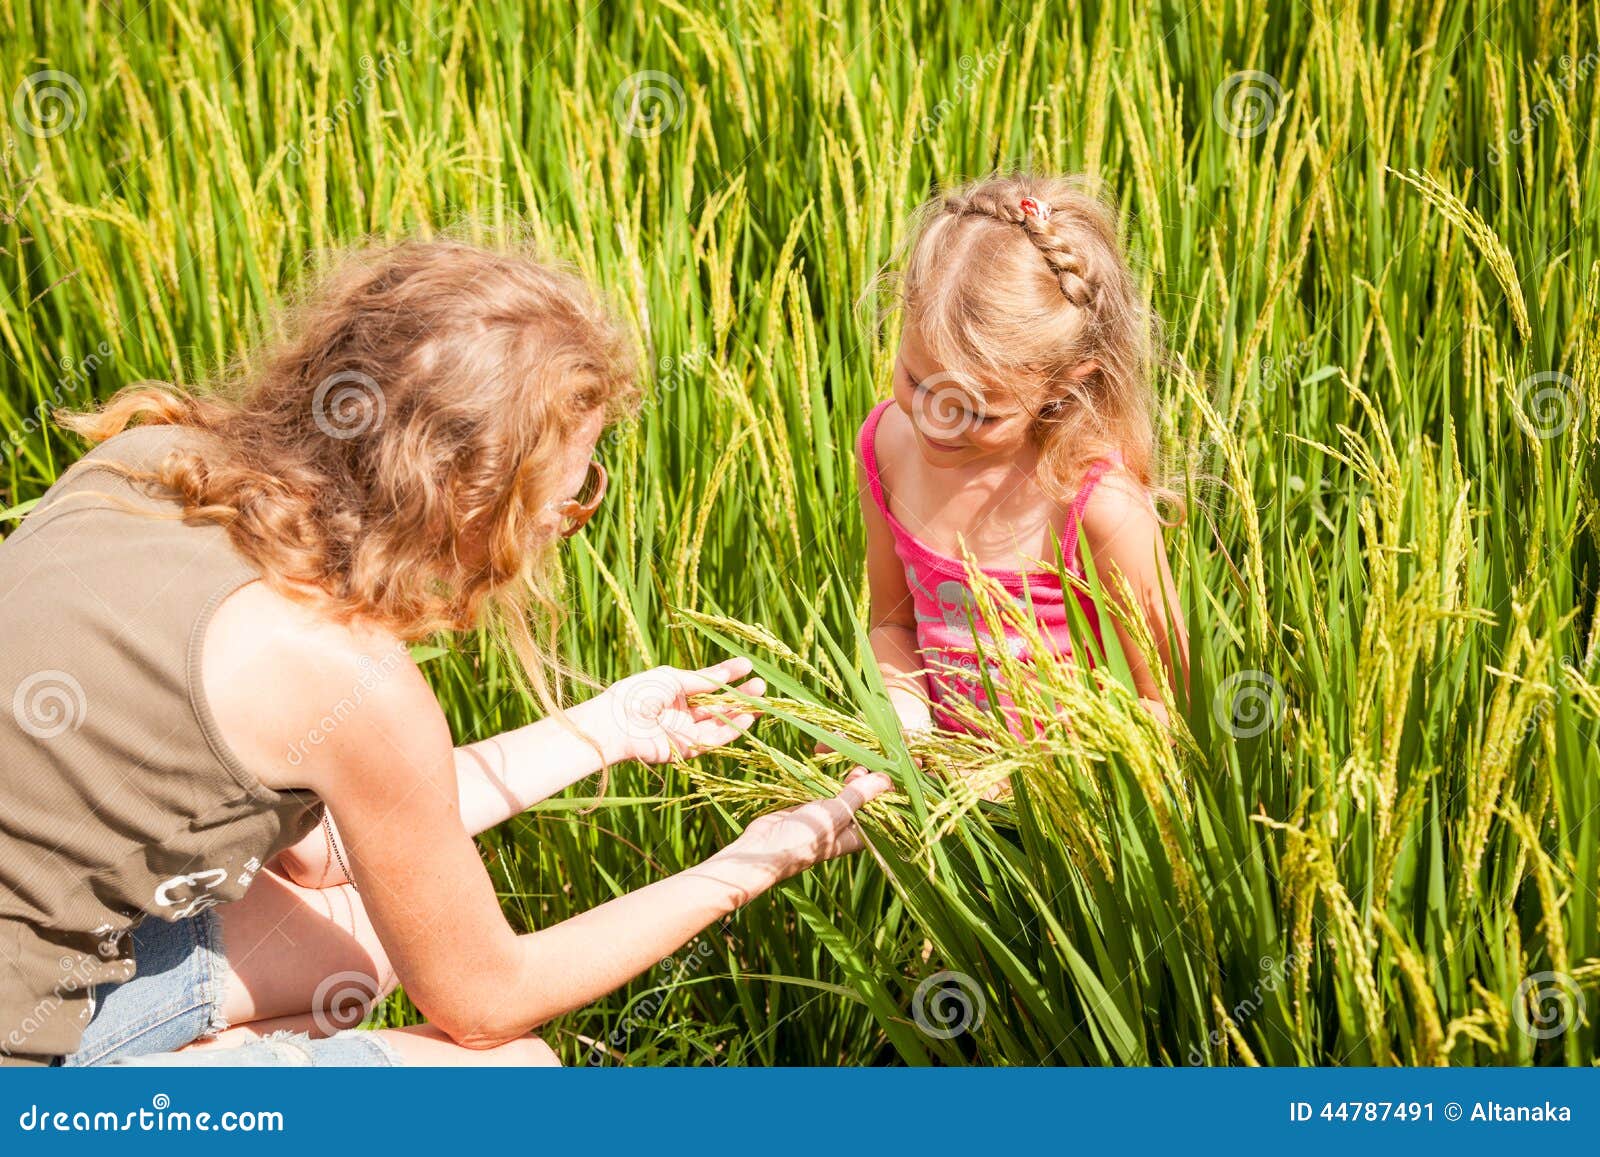 mother and daughter on the rice paddies